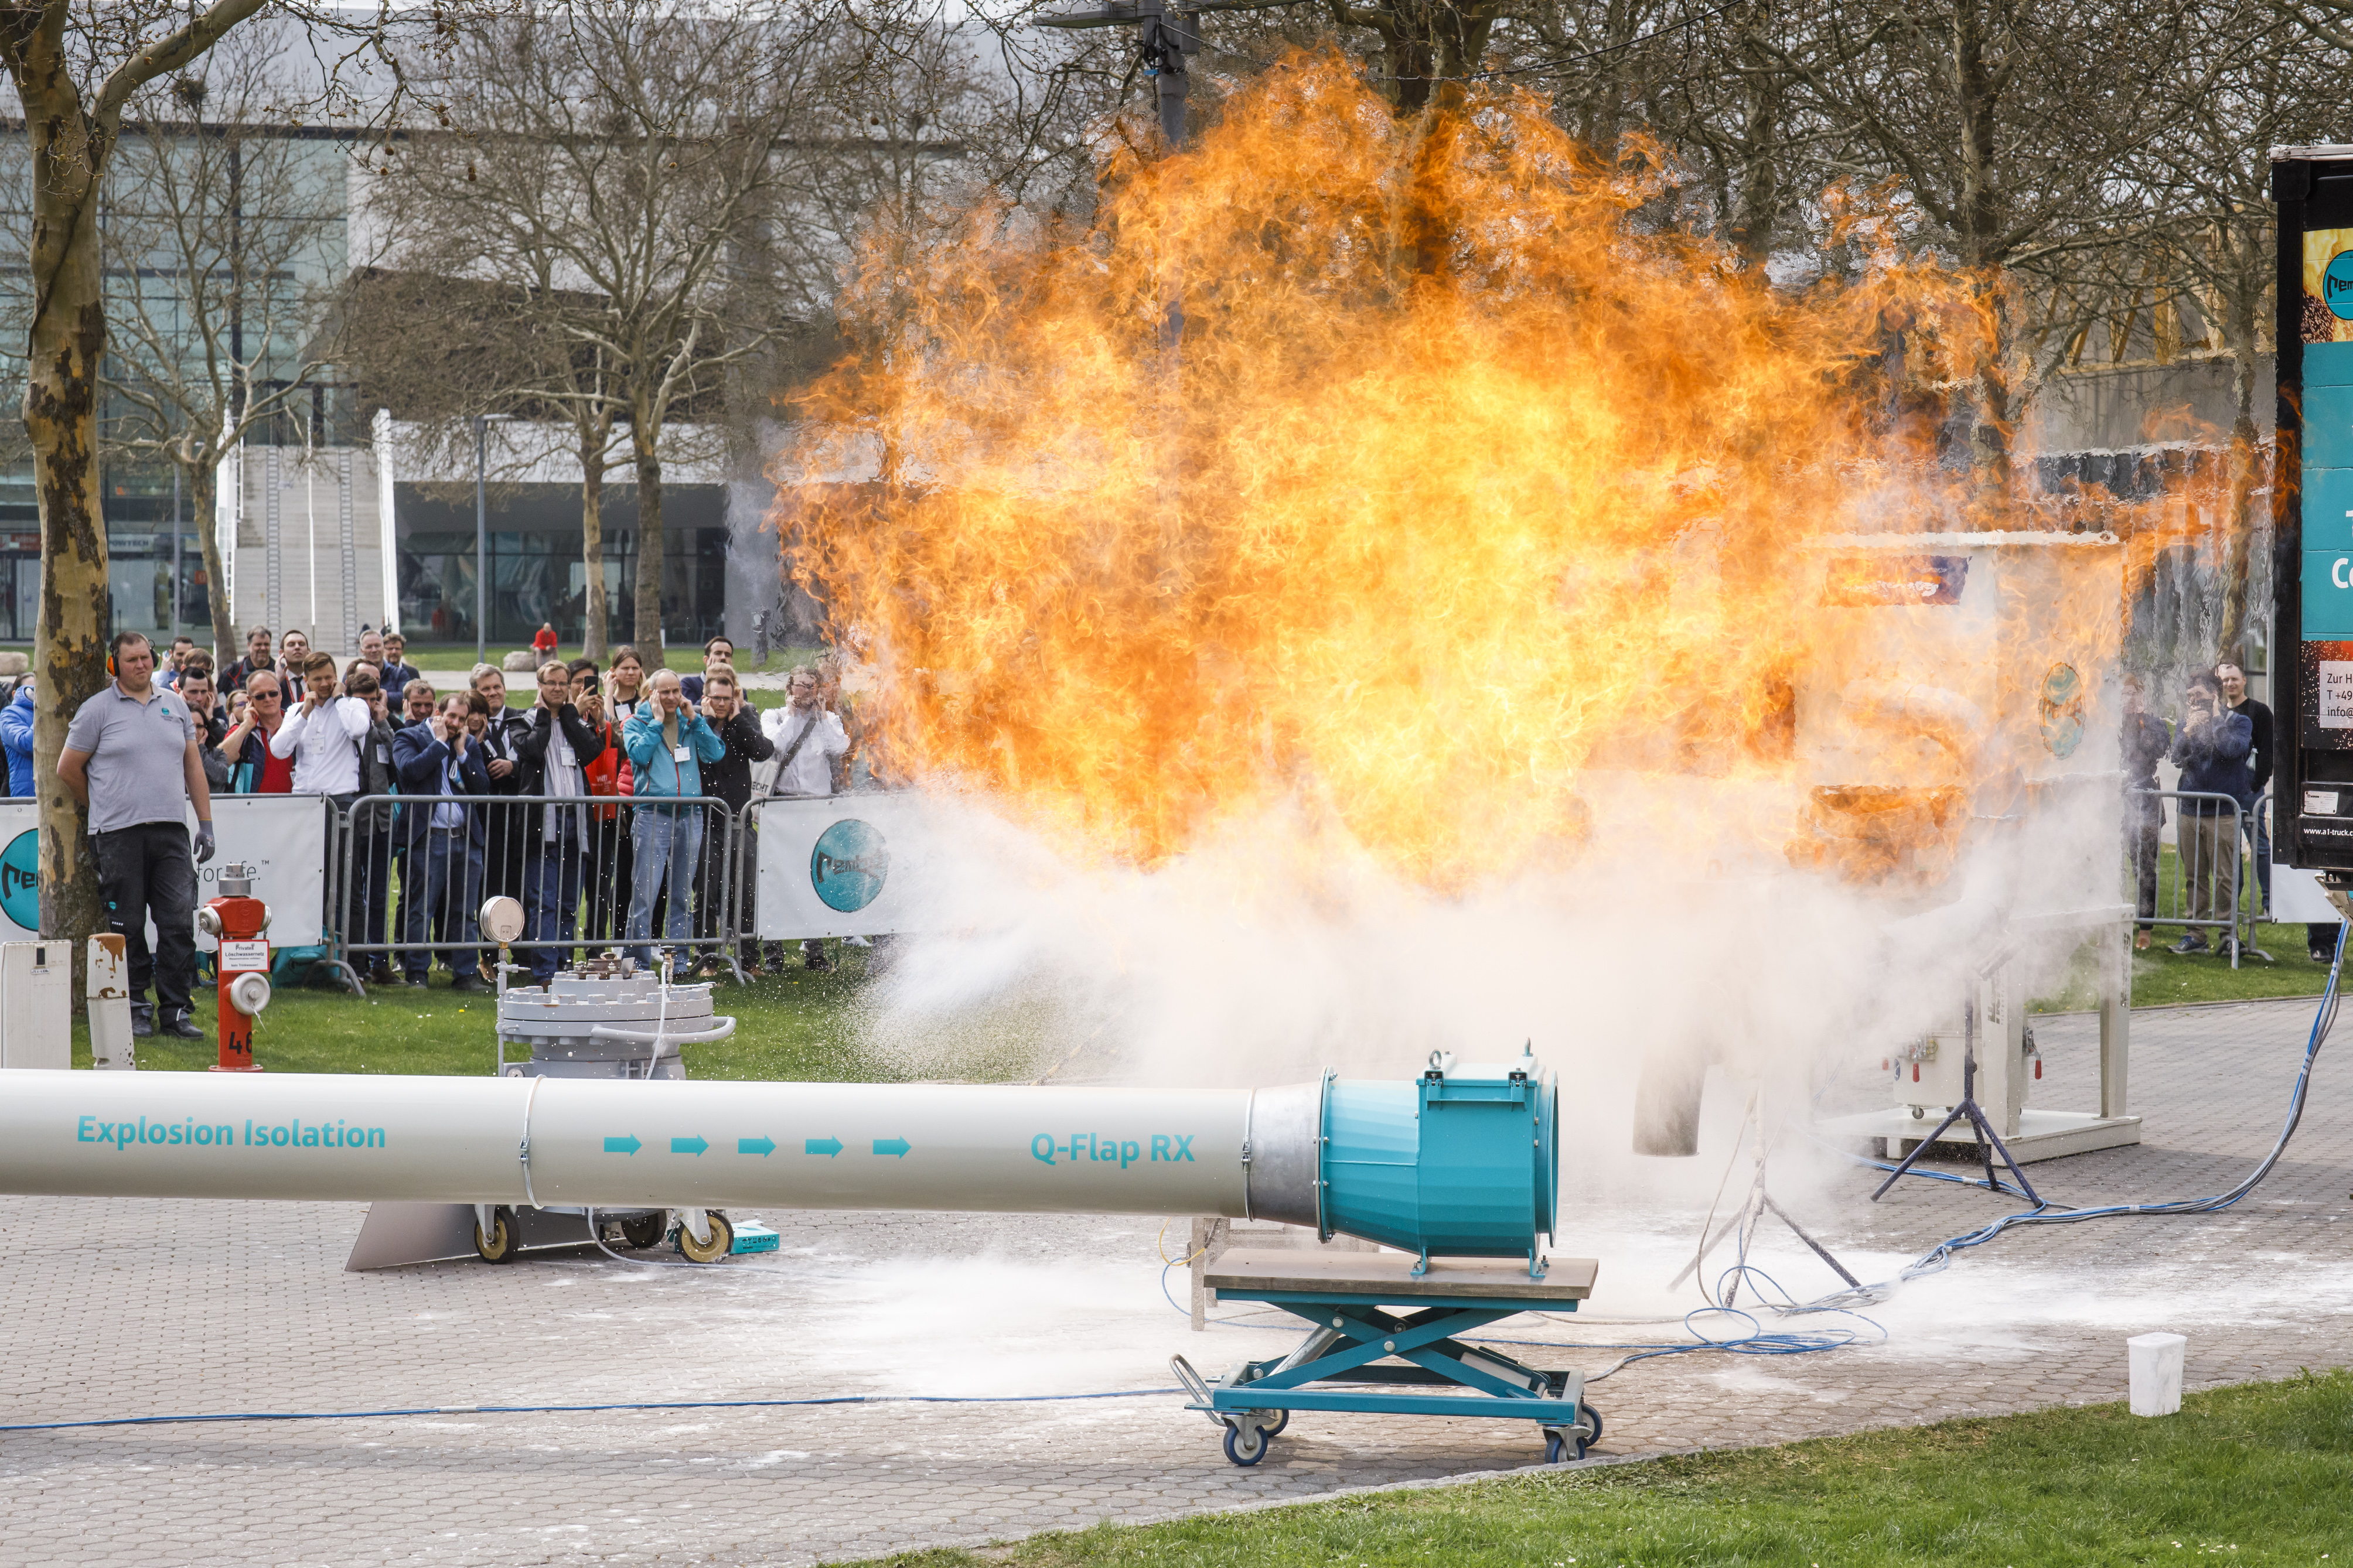 Live demonstrations on explosion protection